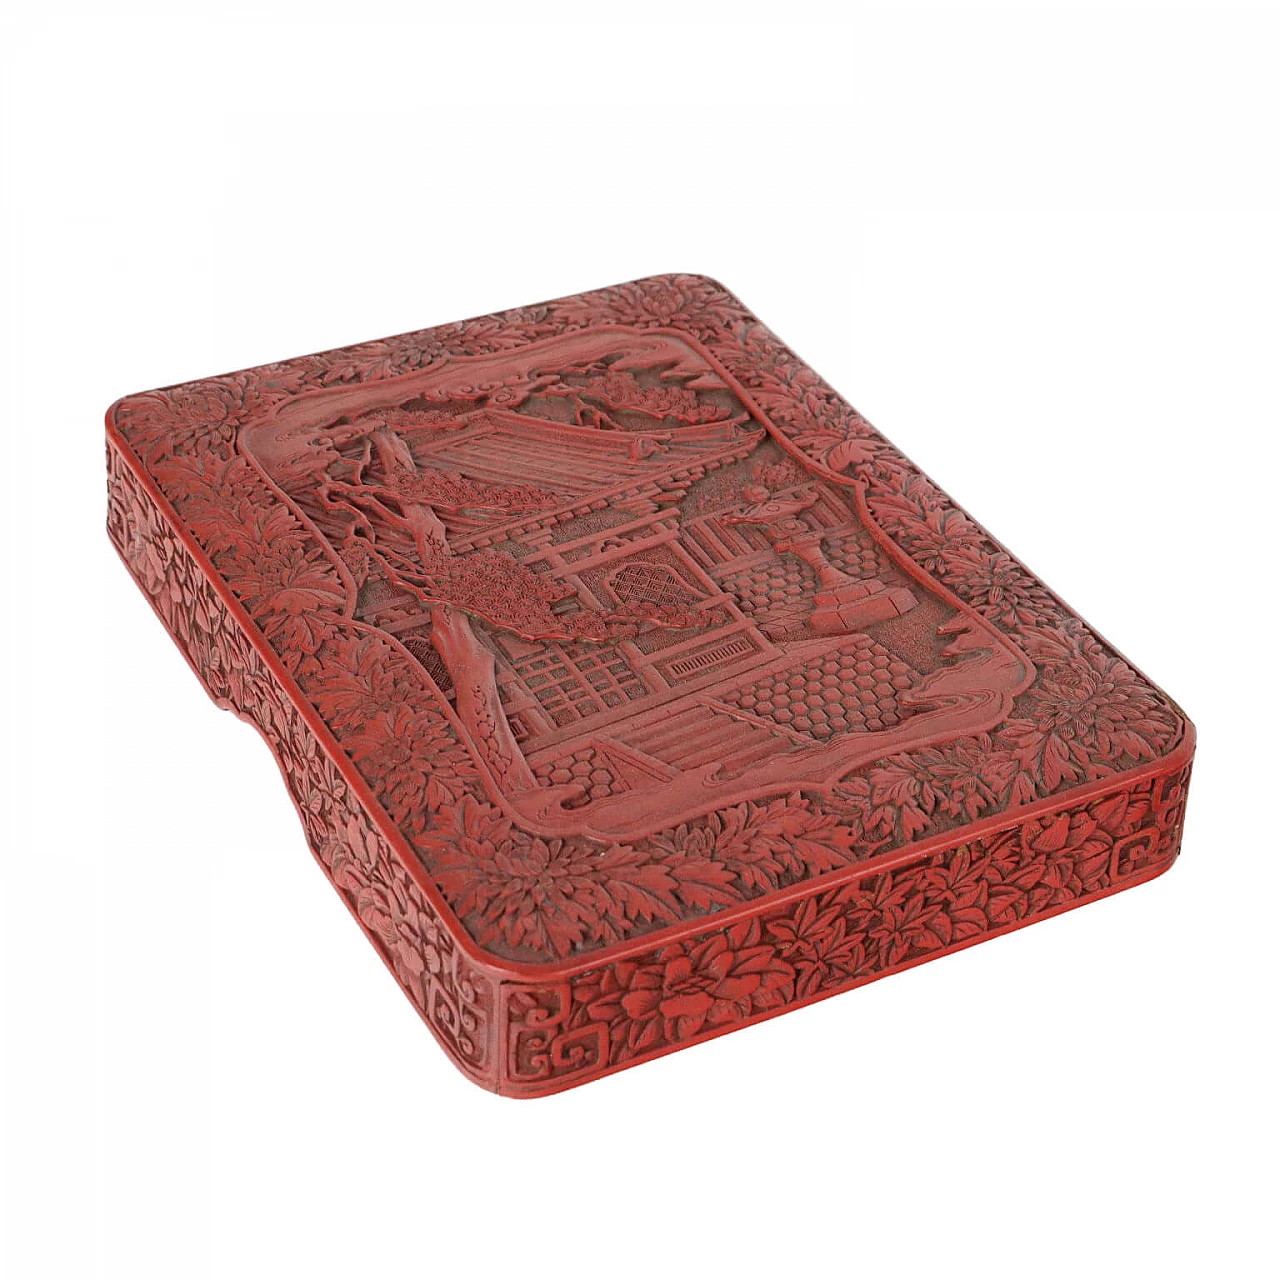 Suzuribako writing box in carved and lacquered wood 1